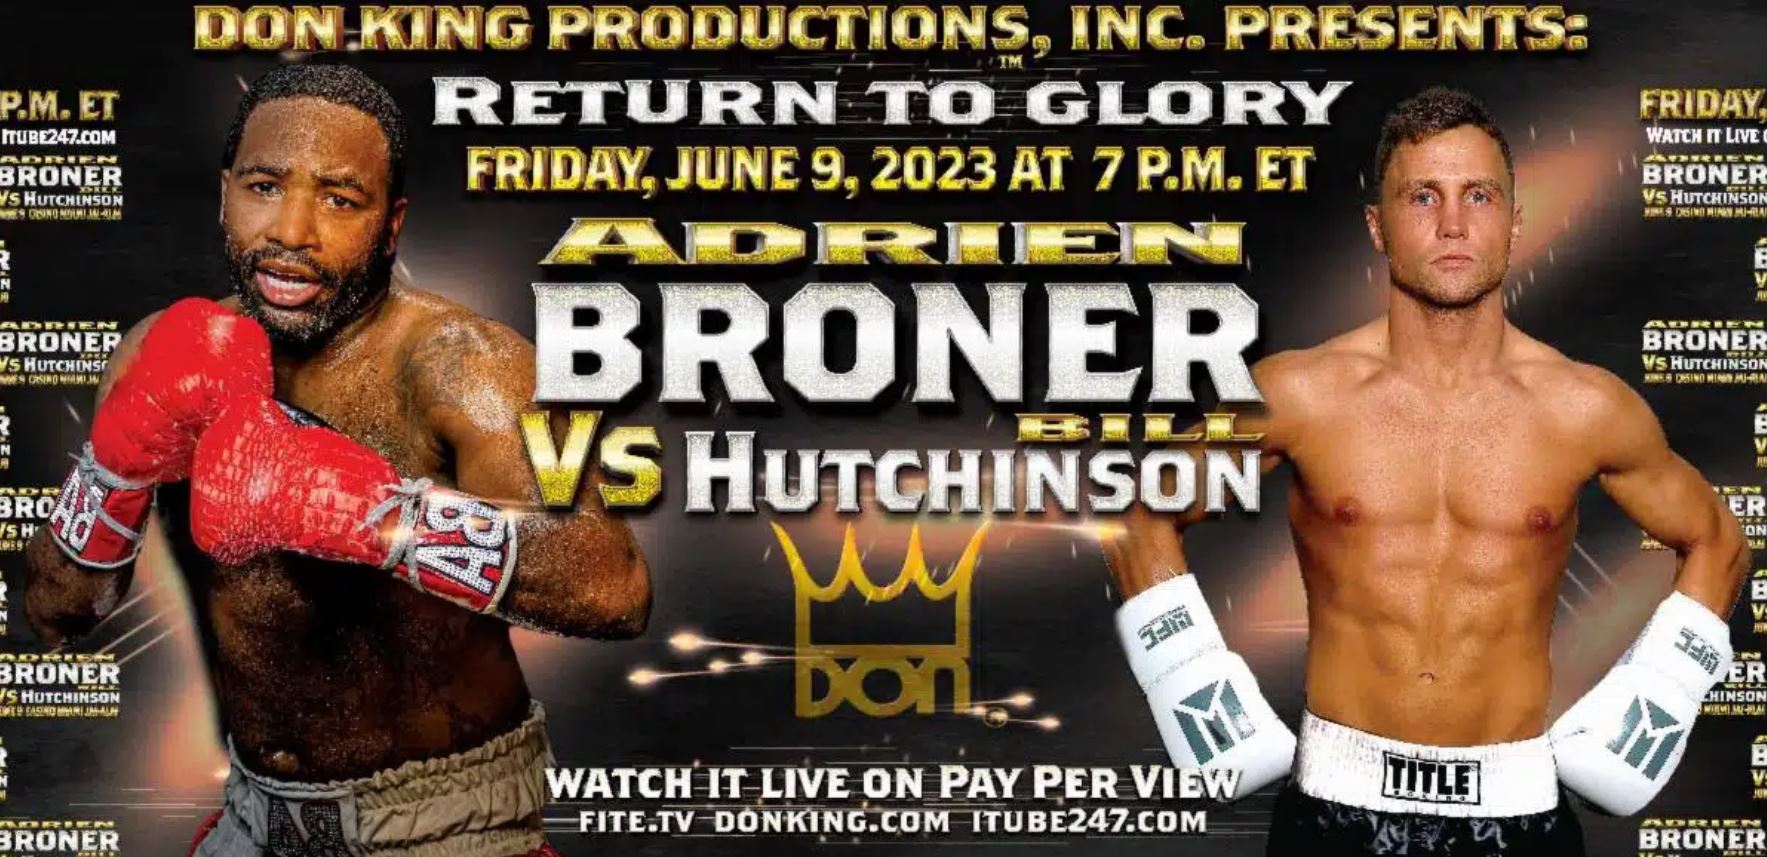 Promotional poster showing Adrien Broner and Bill Hutchinson.